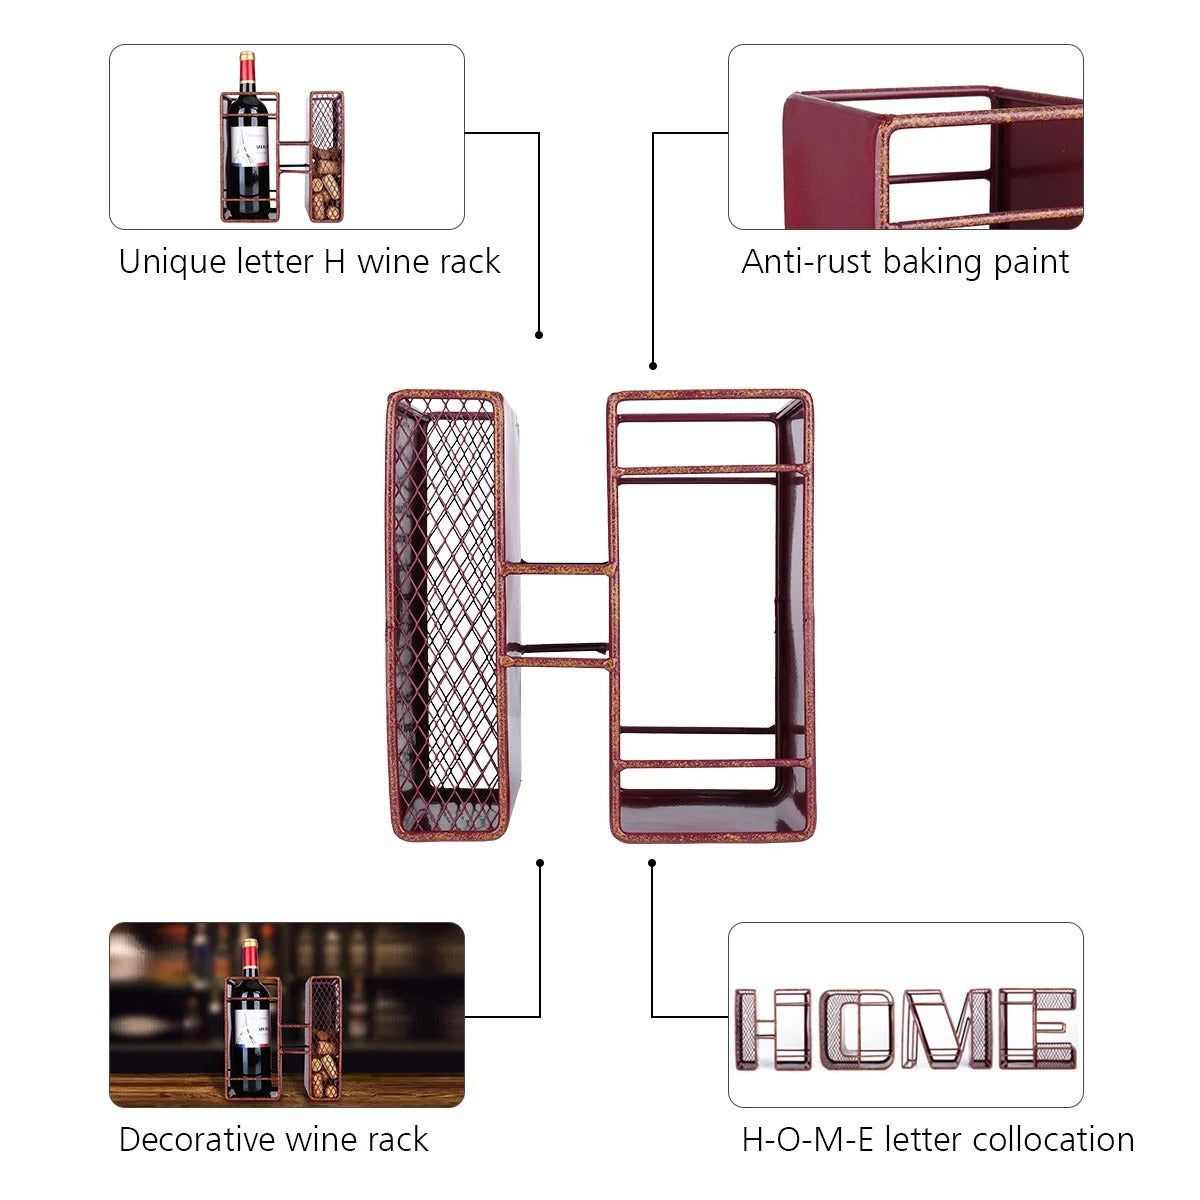 Decorative Letters wine bottle-cork holder is a great item to Housewarming Gifts